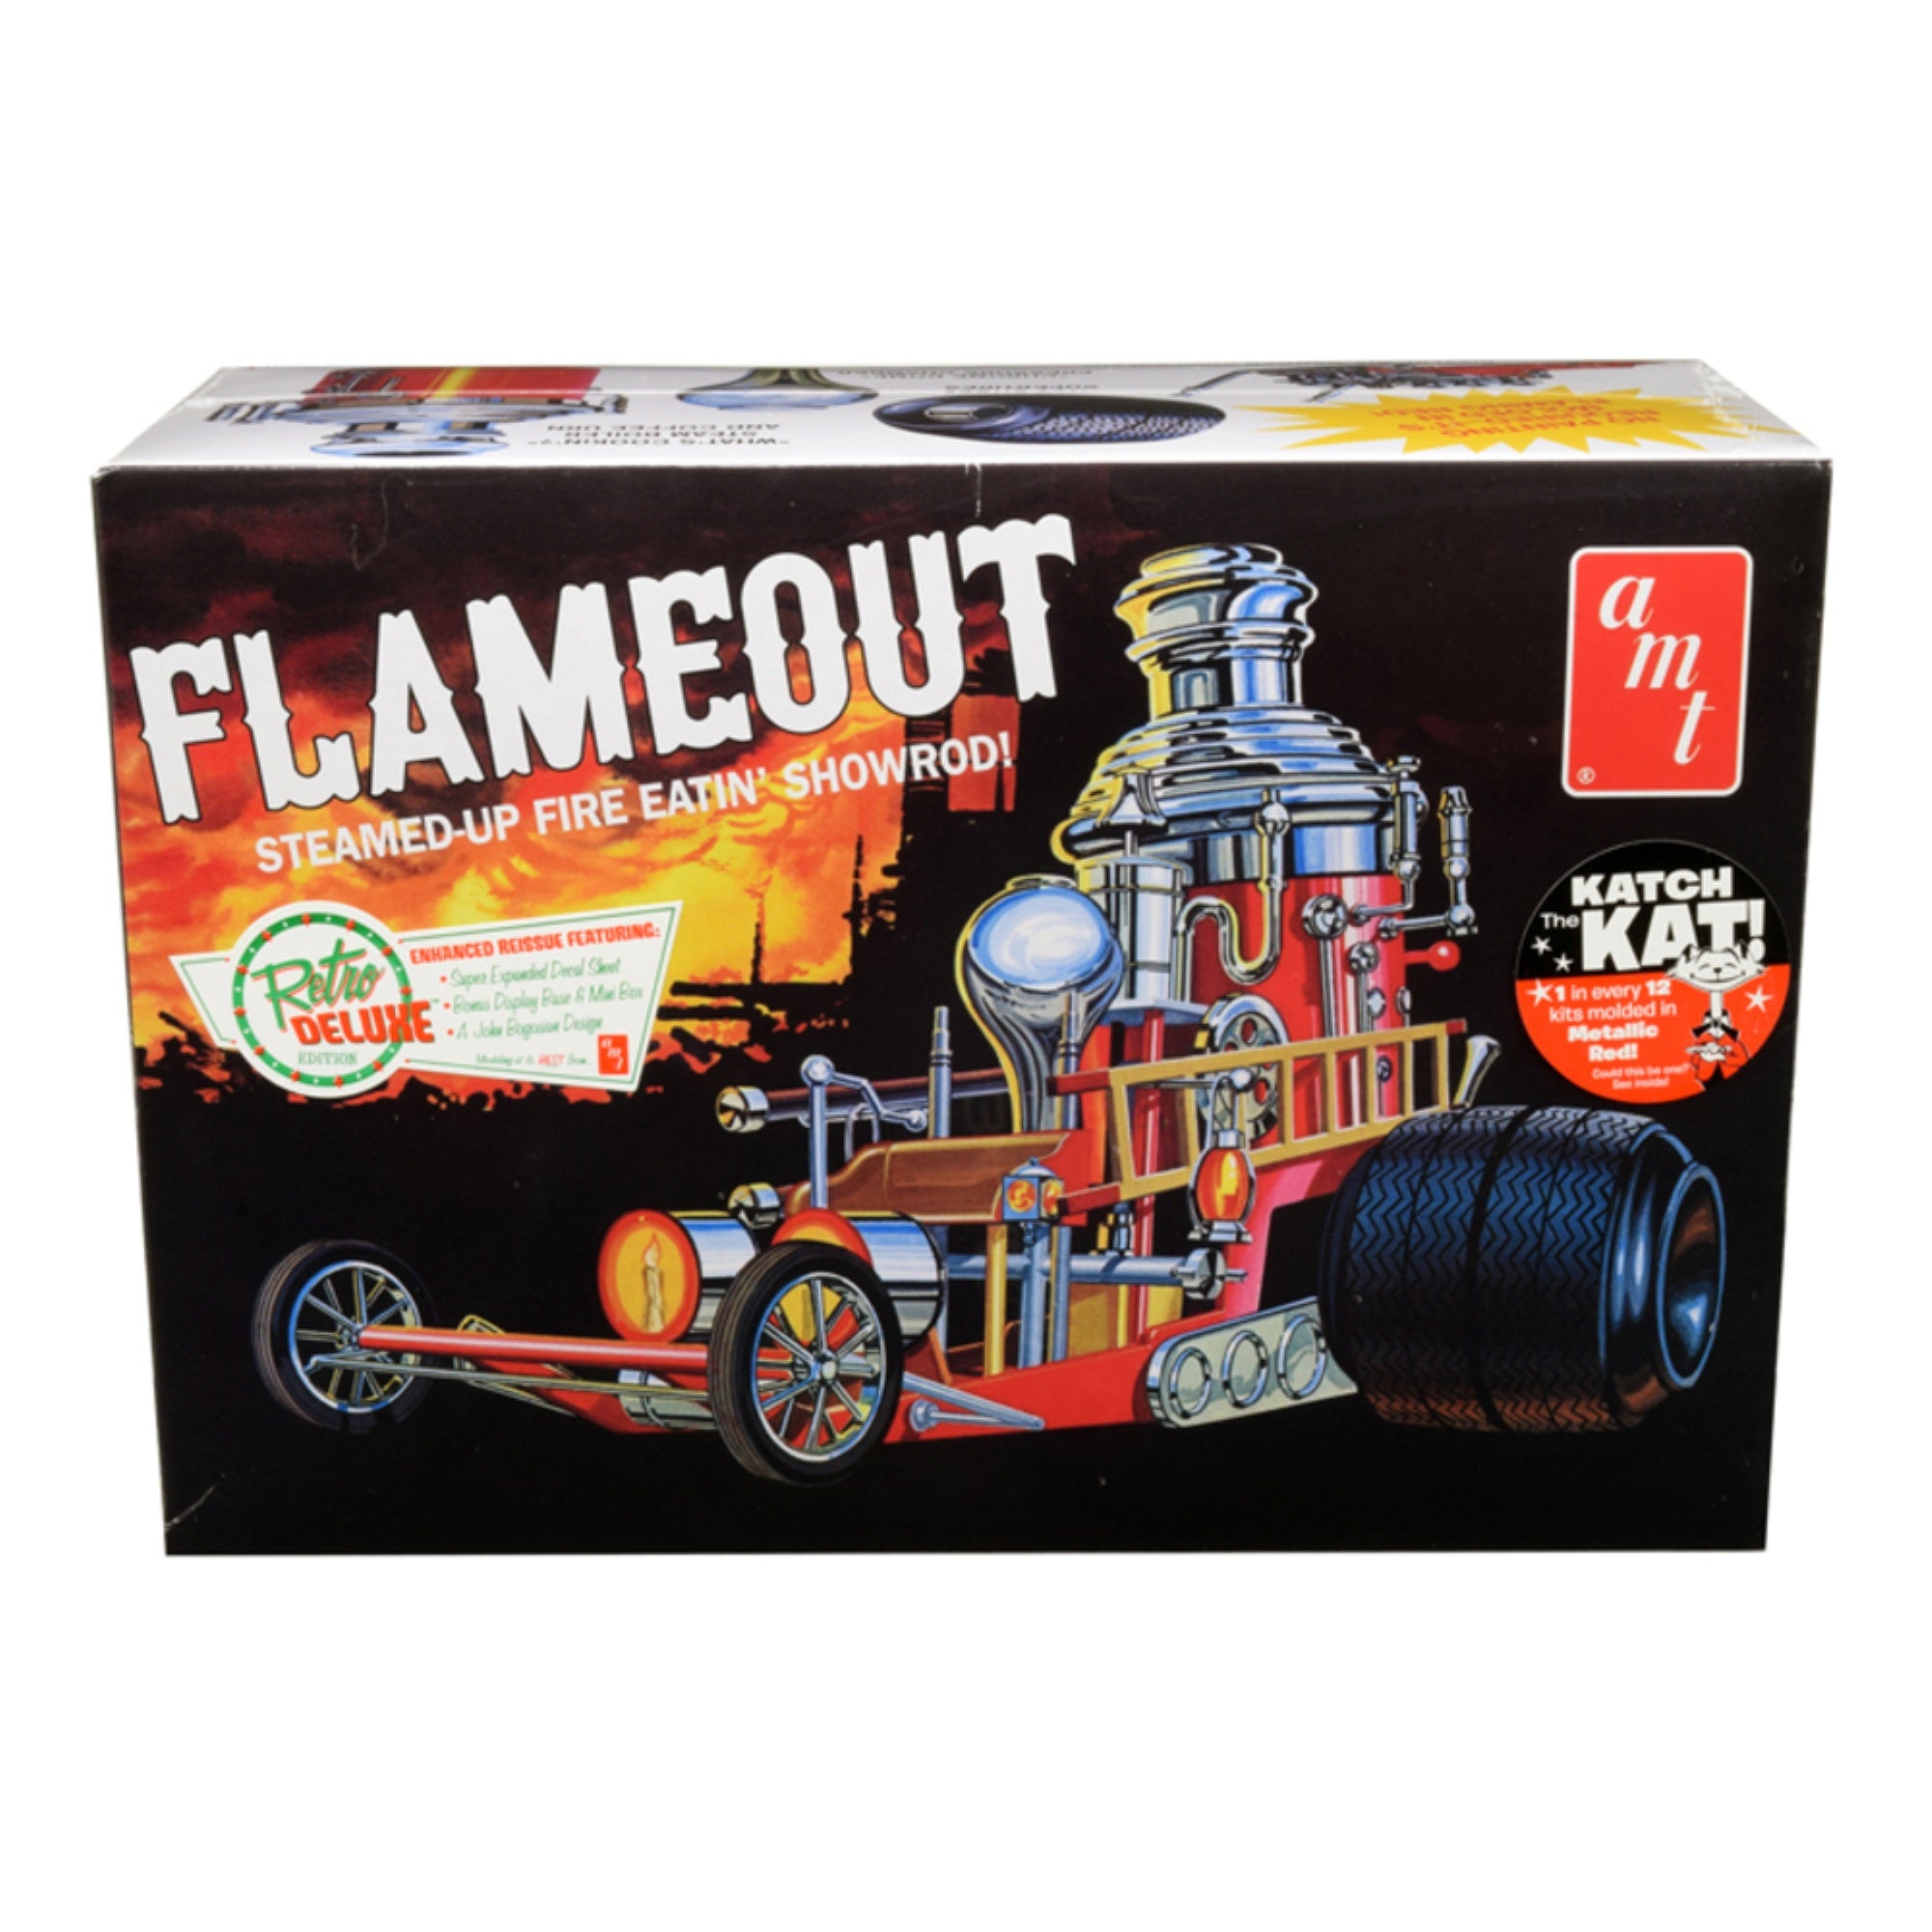 AMT 934 1/25 Flameout Show Rod